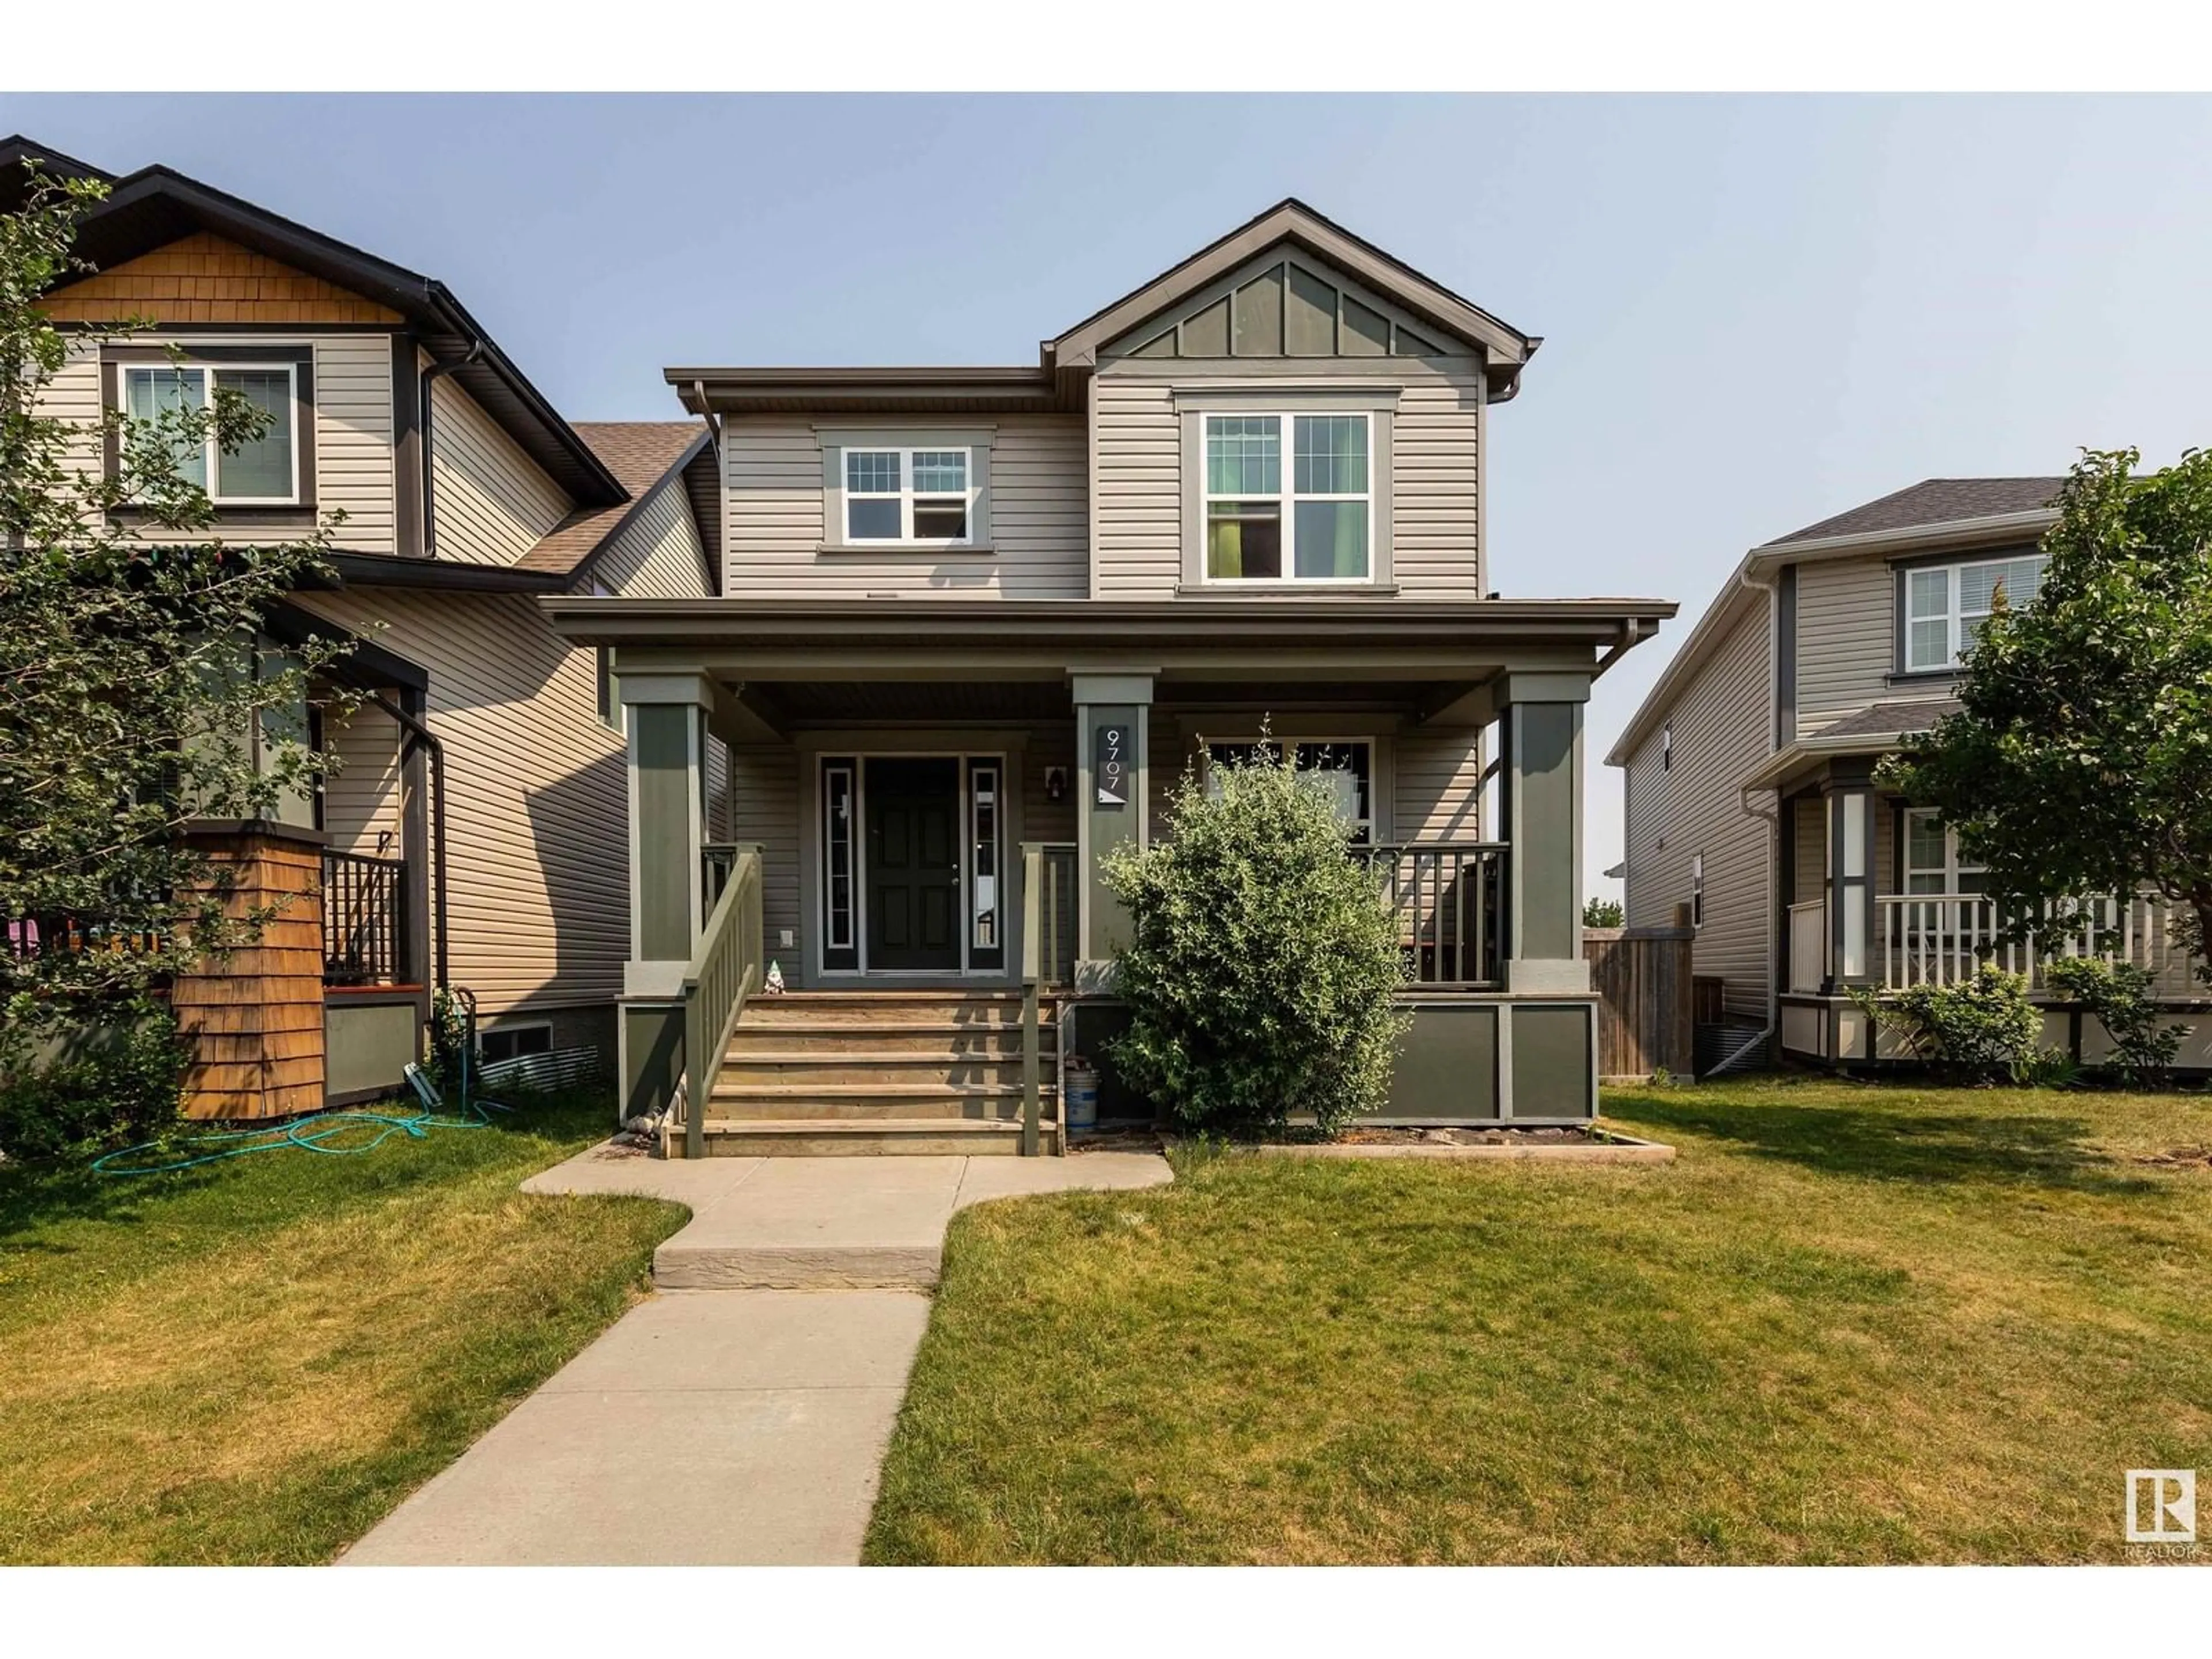 Frontside or backside of a home for 9707 221 ST NW, Edmonton Alberta T5T4H7